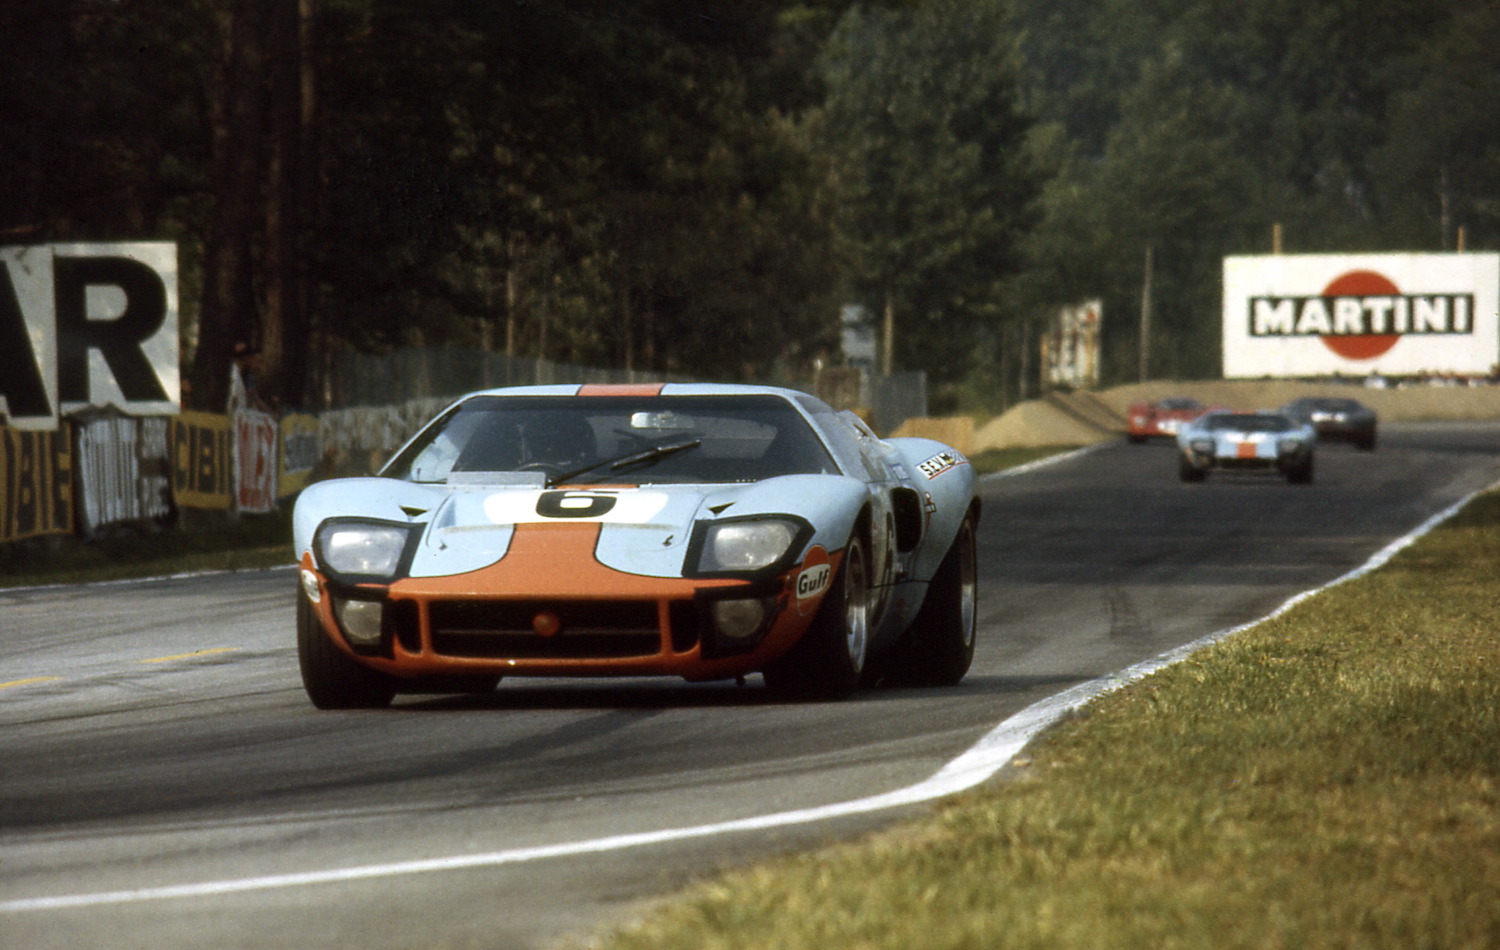 Le Mans 24 Hours 15th June 1969. Two blue and orange GT40s on a straightaway, other cars in the background: Jacky Ickx/Jackie Oliver, Ford GT40, race winner. Car no 7 in background David Hobbs/Mike Hailwood, Ford GT40, finished 3rd.  